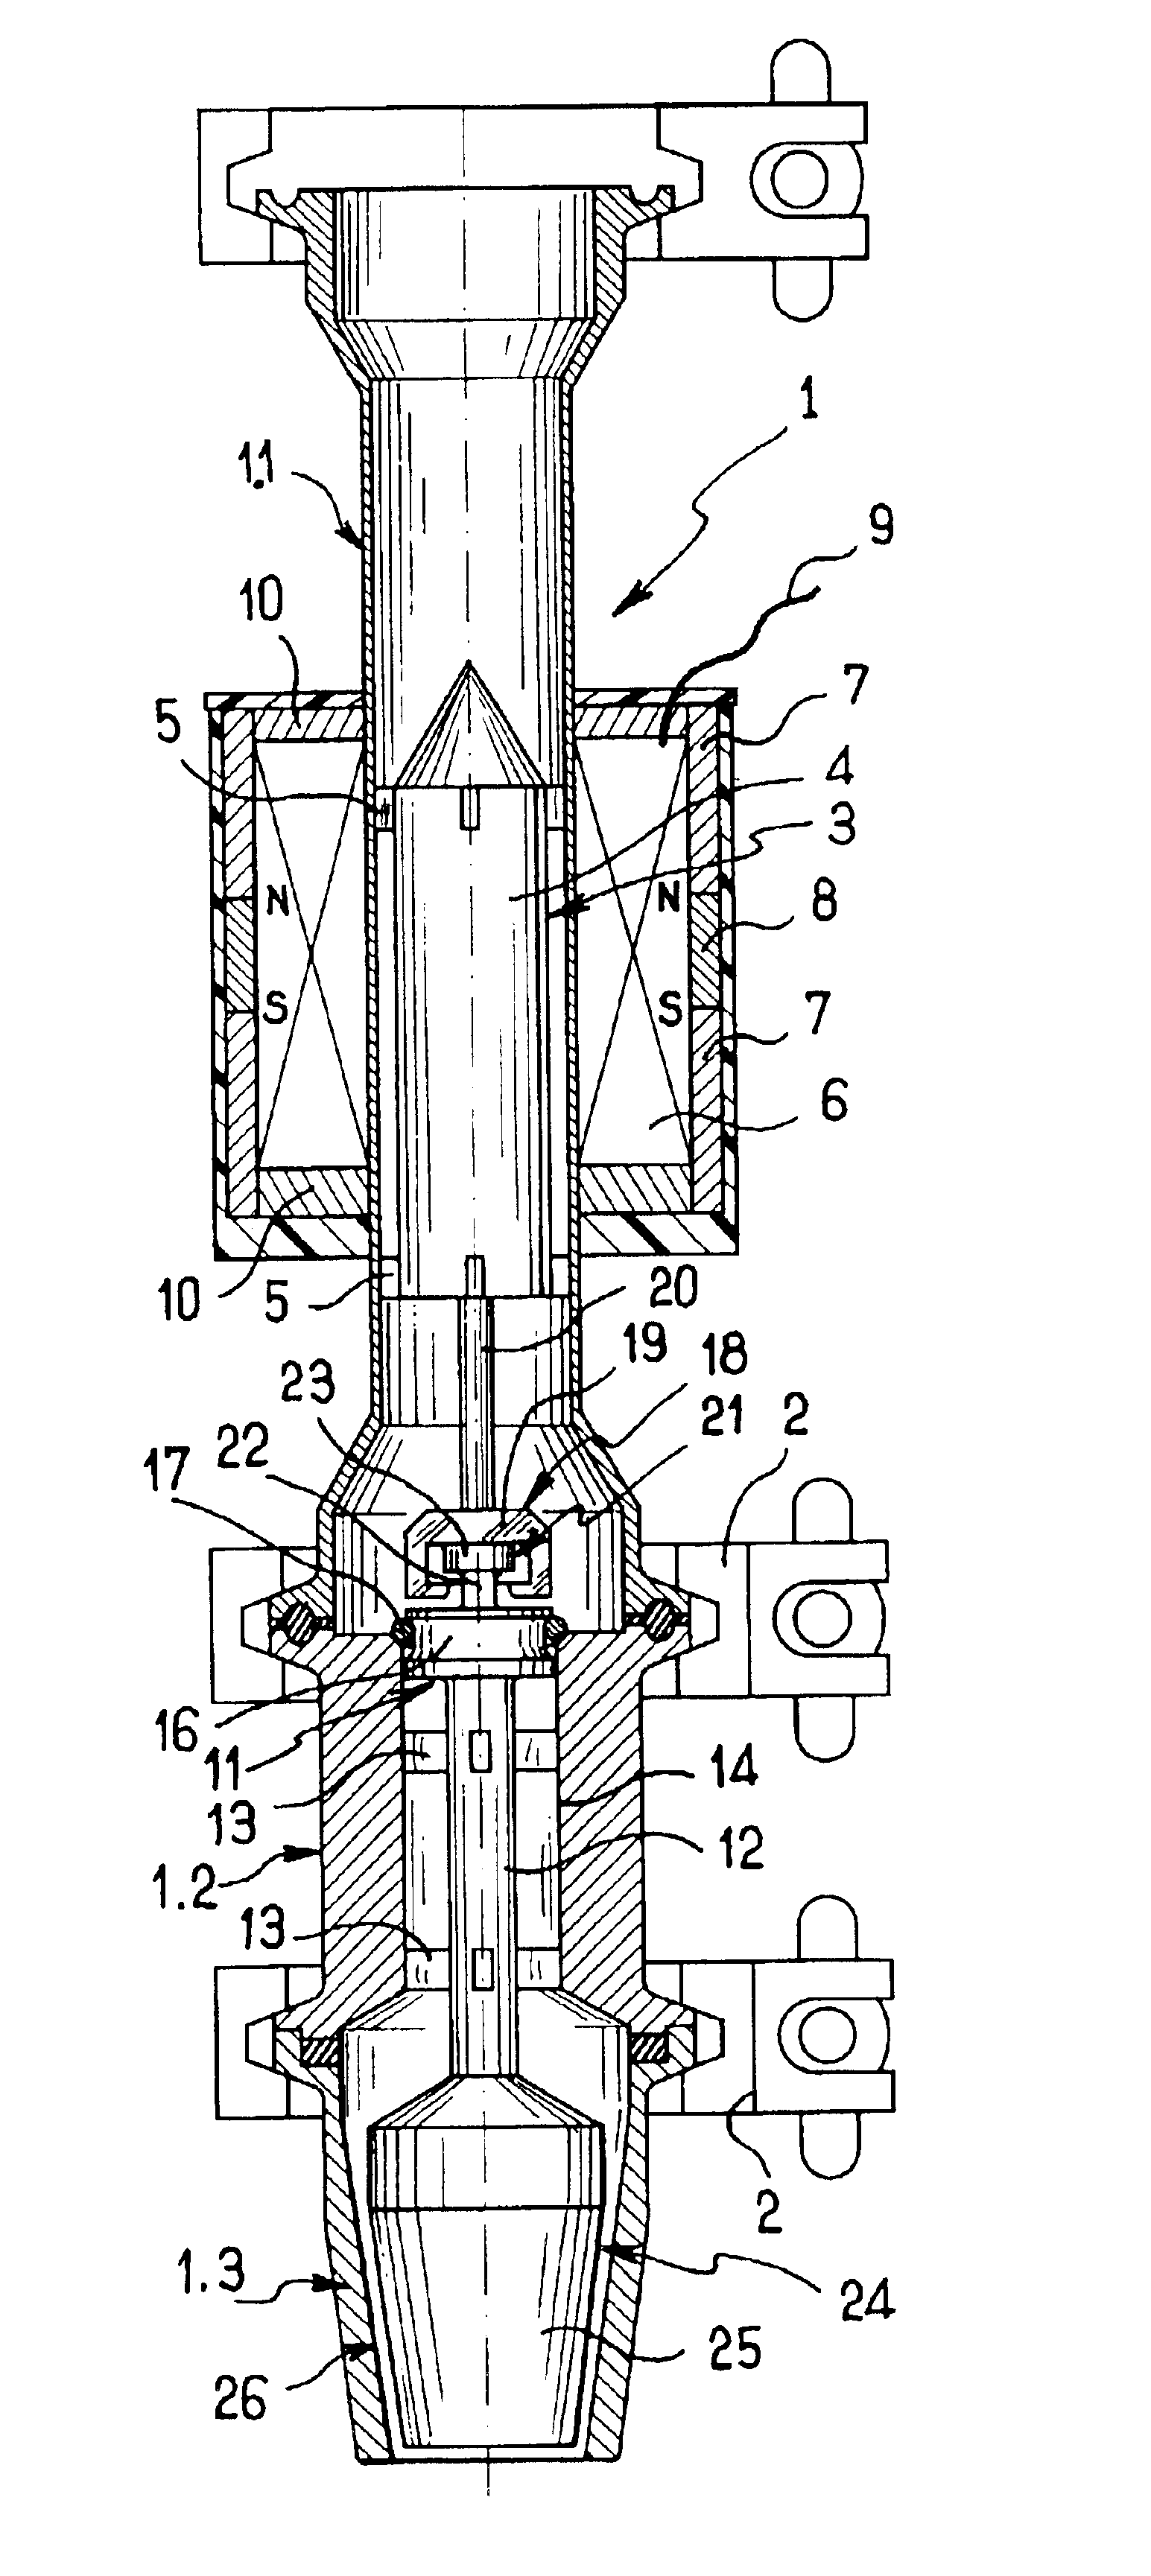 Electromagnetically-controlled filler spout